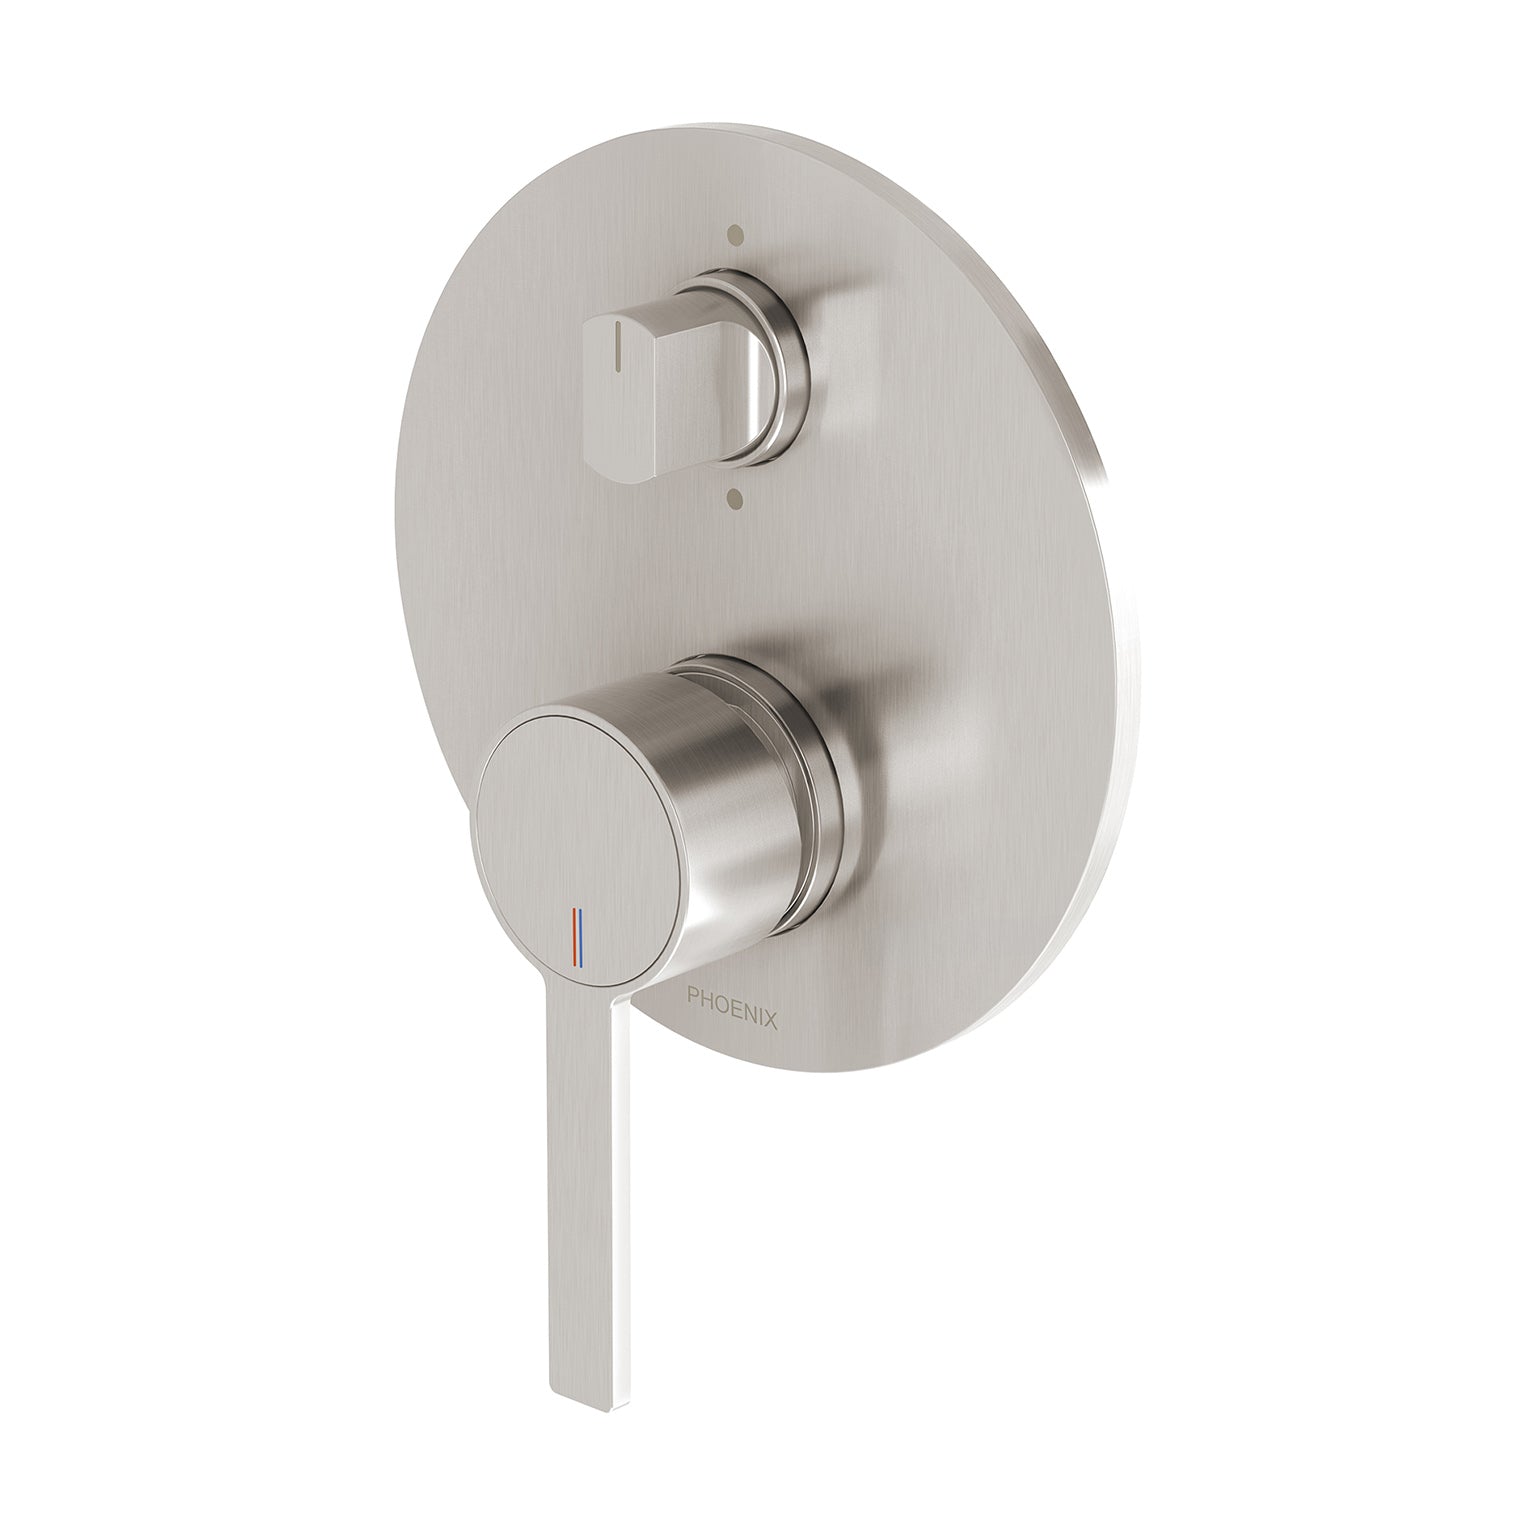 PHOENIX LEXI MKII SWITCHMIX SHOWER / BATH DIVERTER MIXER FIT-OFF AND ROUGH-IN KIT BRUSHED NICKEL